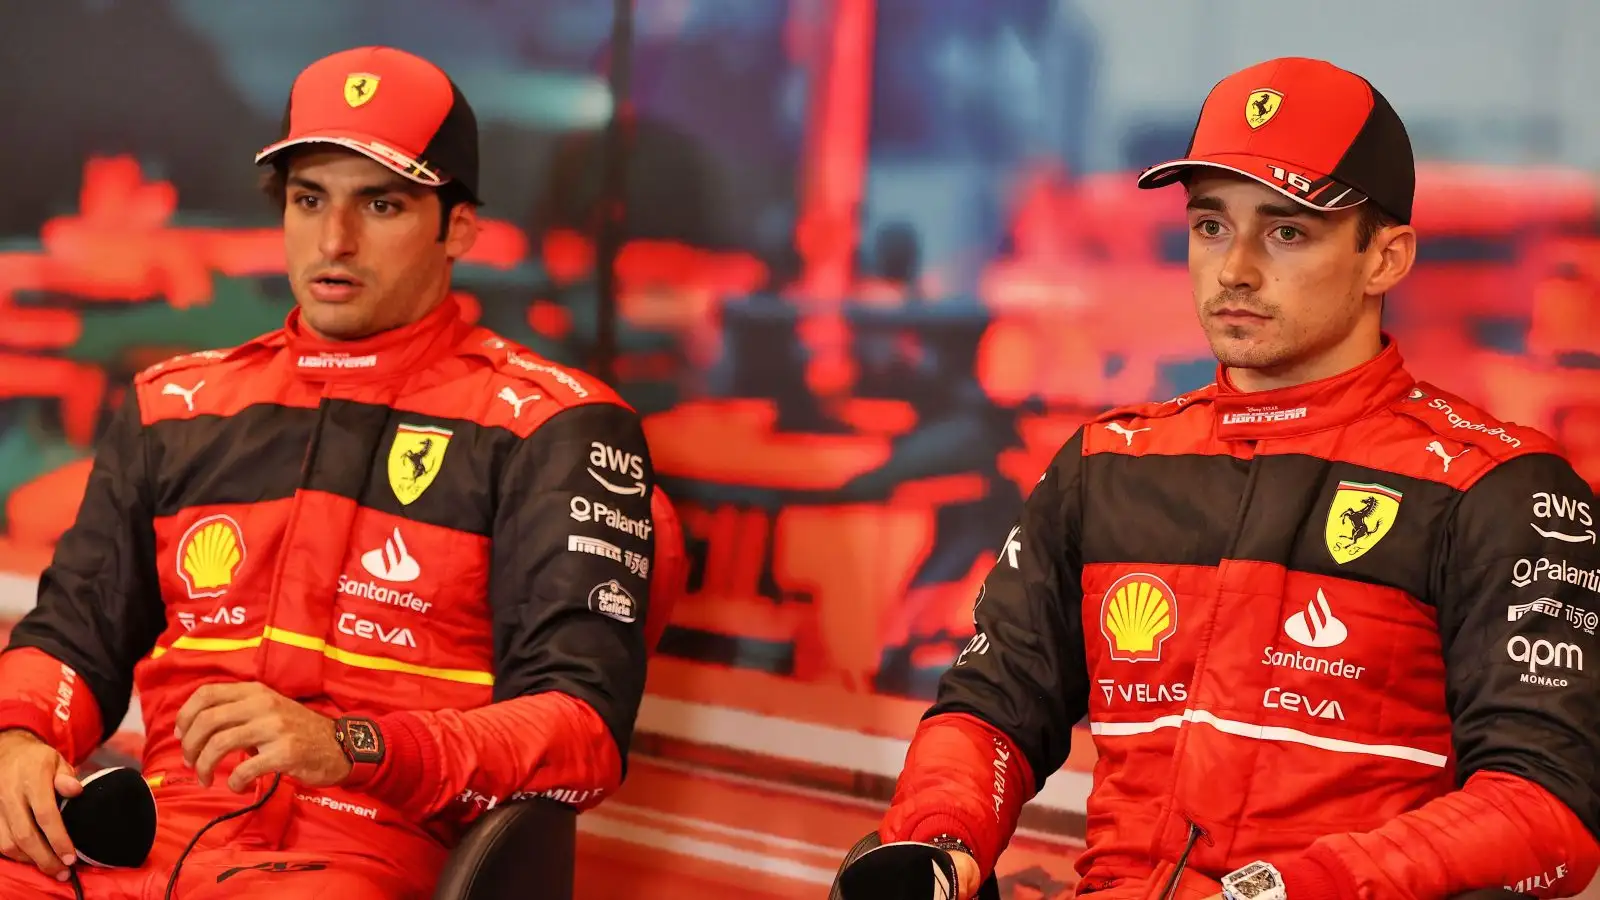 Carlos Sainz and Charles Leclerc during a press conference. Monaco, May 2022.